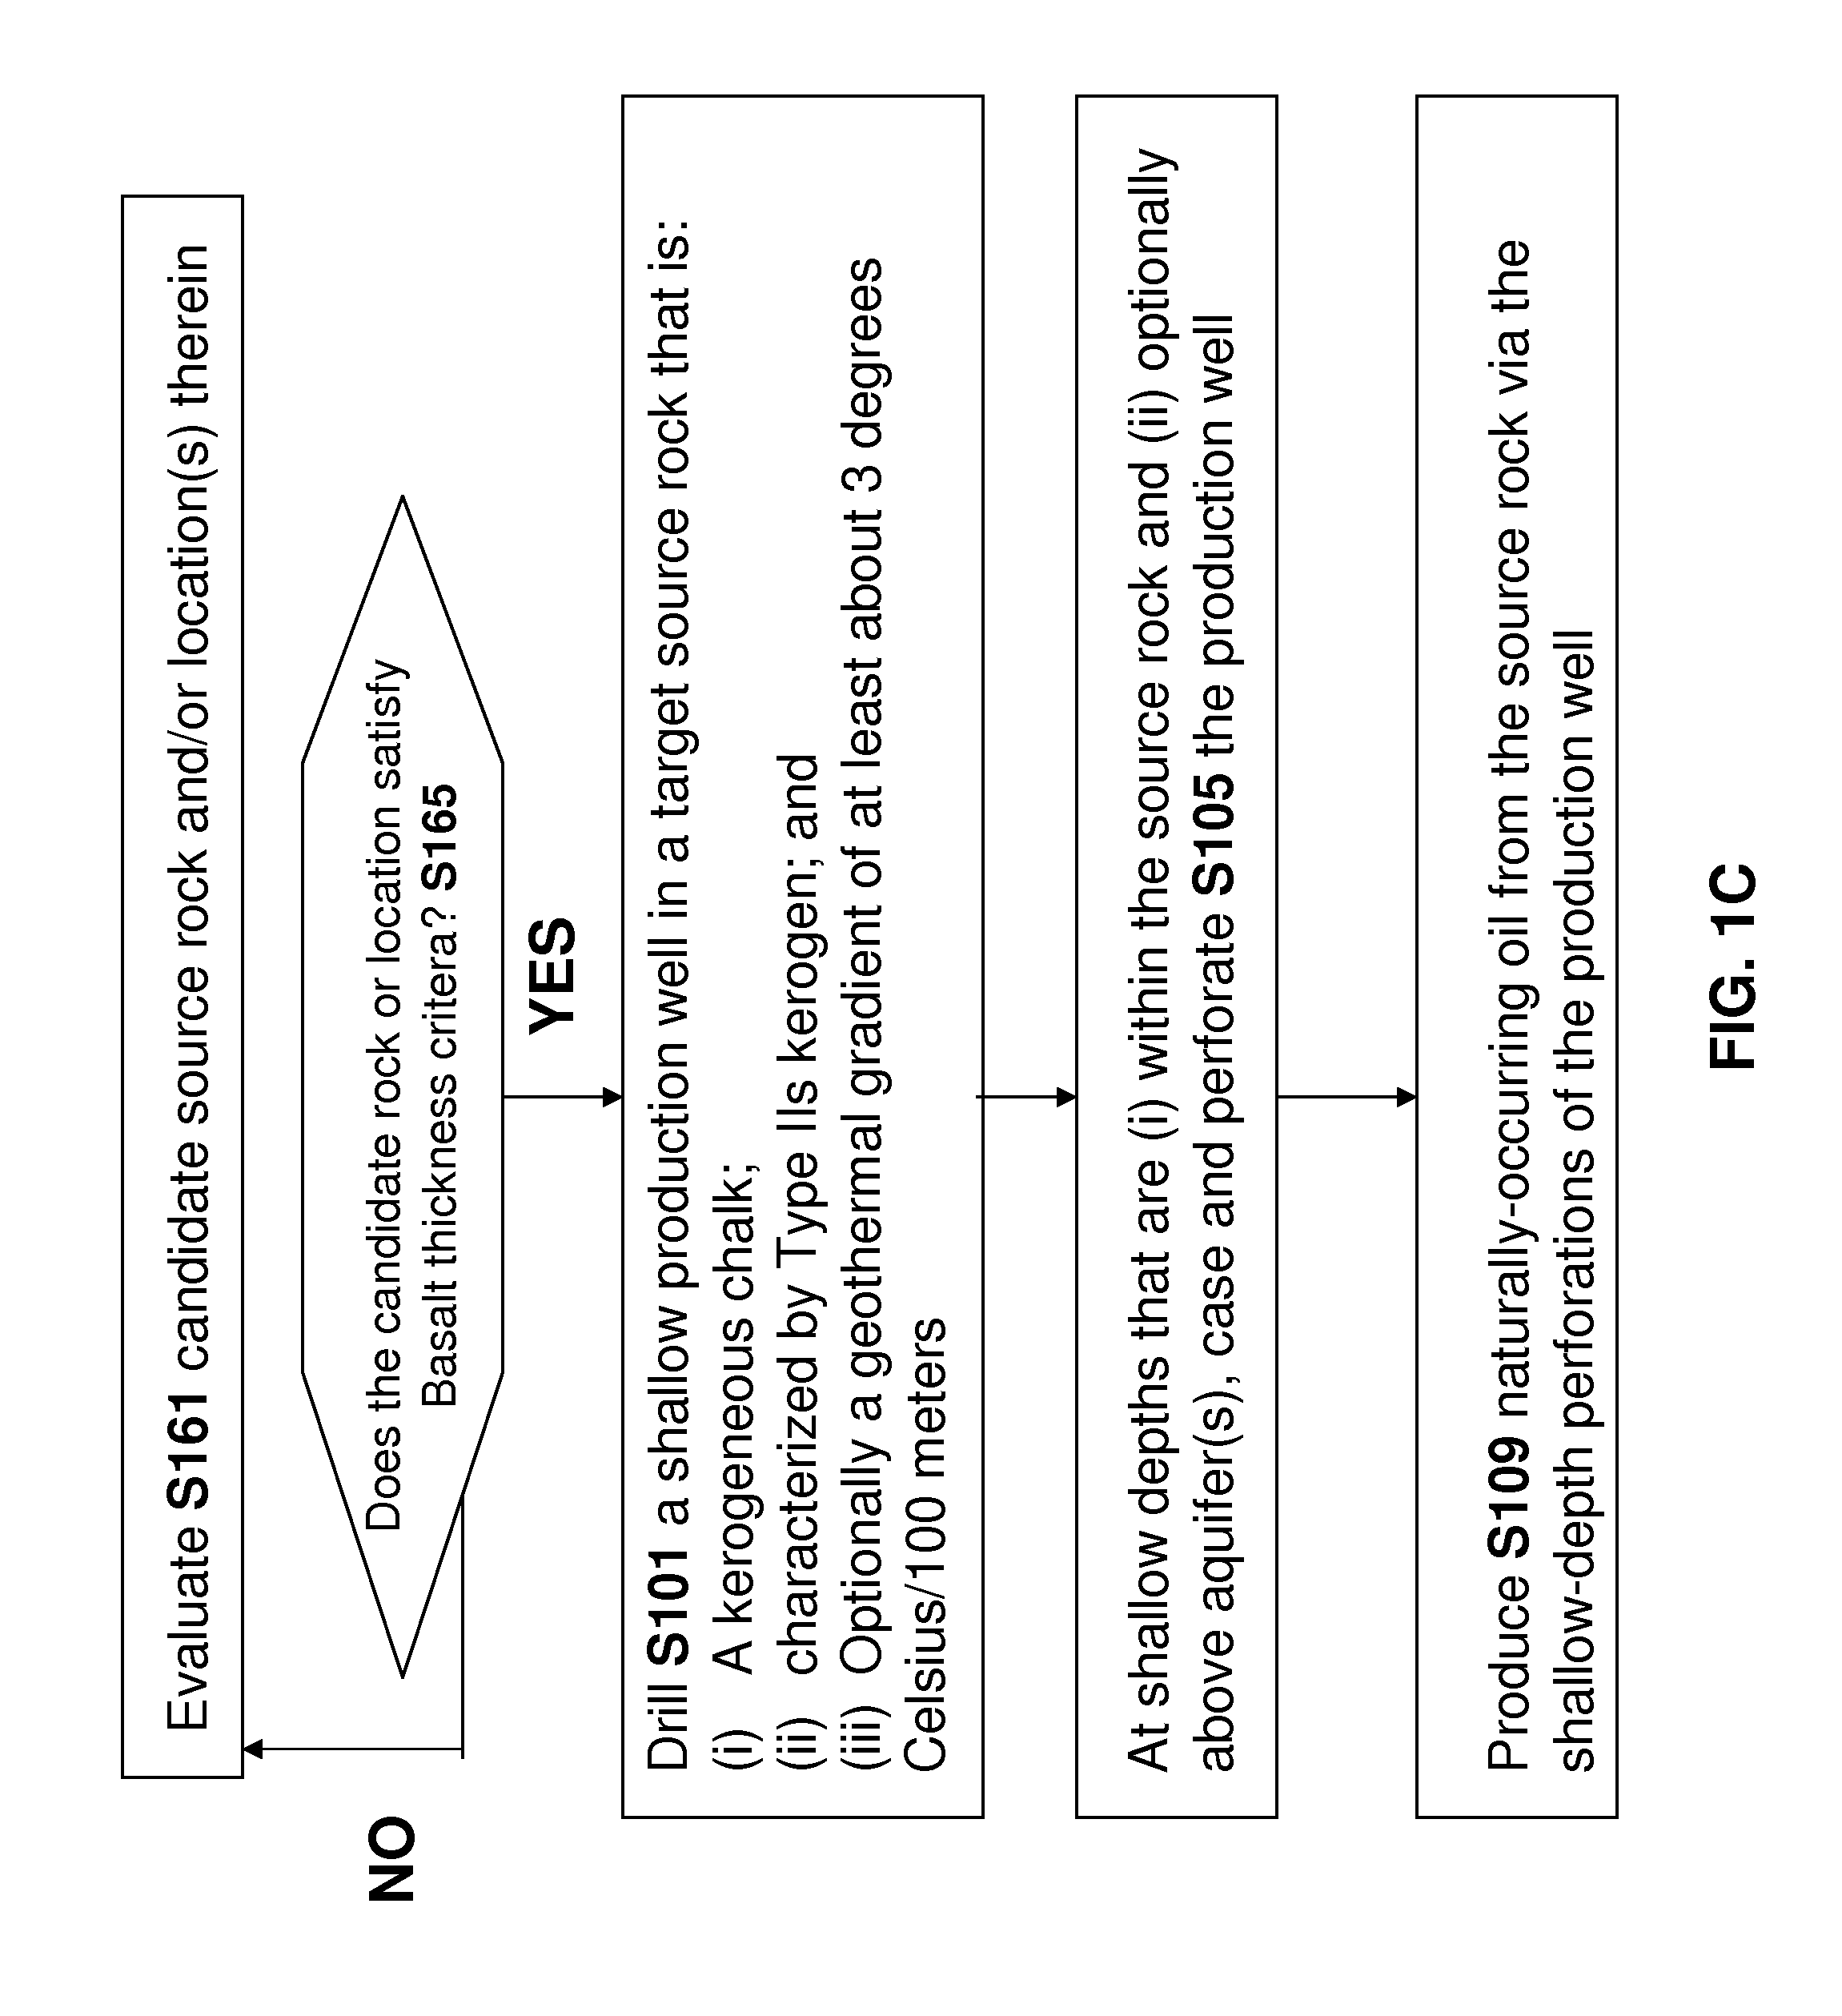 Method and apparatus for producing unconventional oil at shallow depths